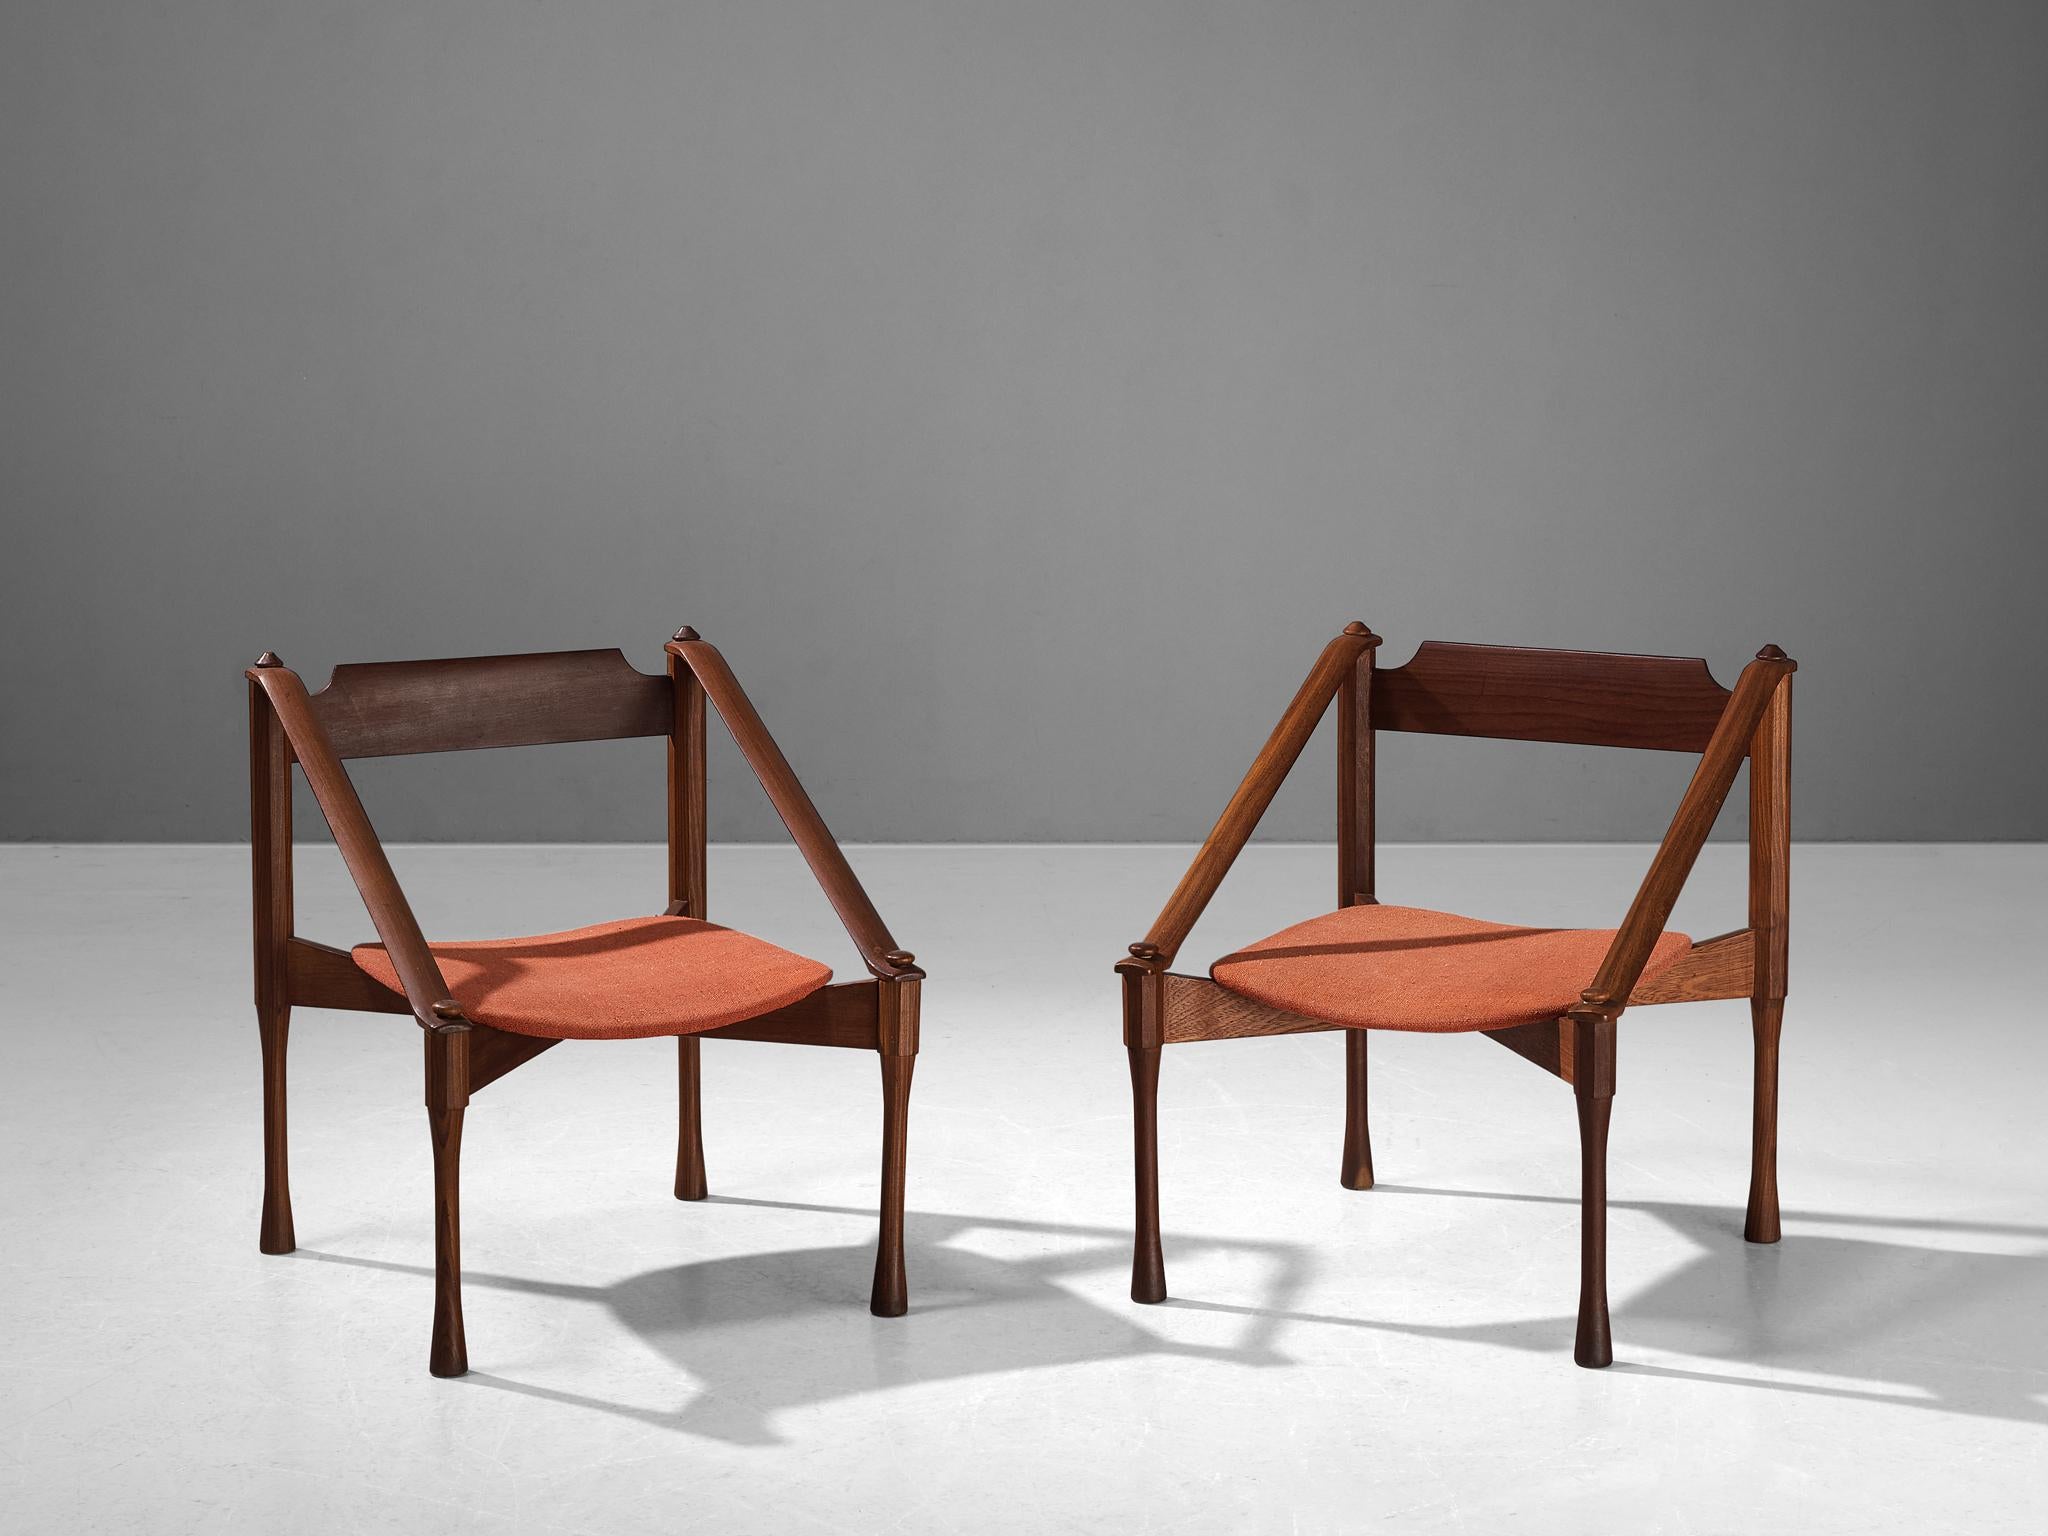 Giulio Moscatelli, pair of armchairs, teak, fabric, Italy, ca. 1950

This pair of armchairs by Giulio Moscatelli is distinctive in its execution. The legs are beautifully sculpted, showing concave carvings. The diagonal placed armrests give a sense